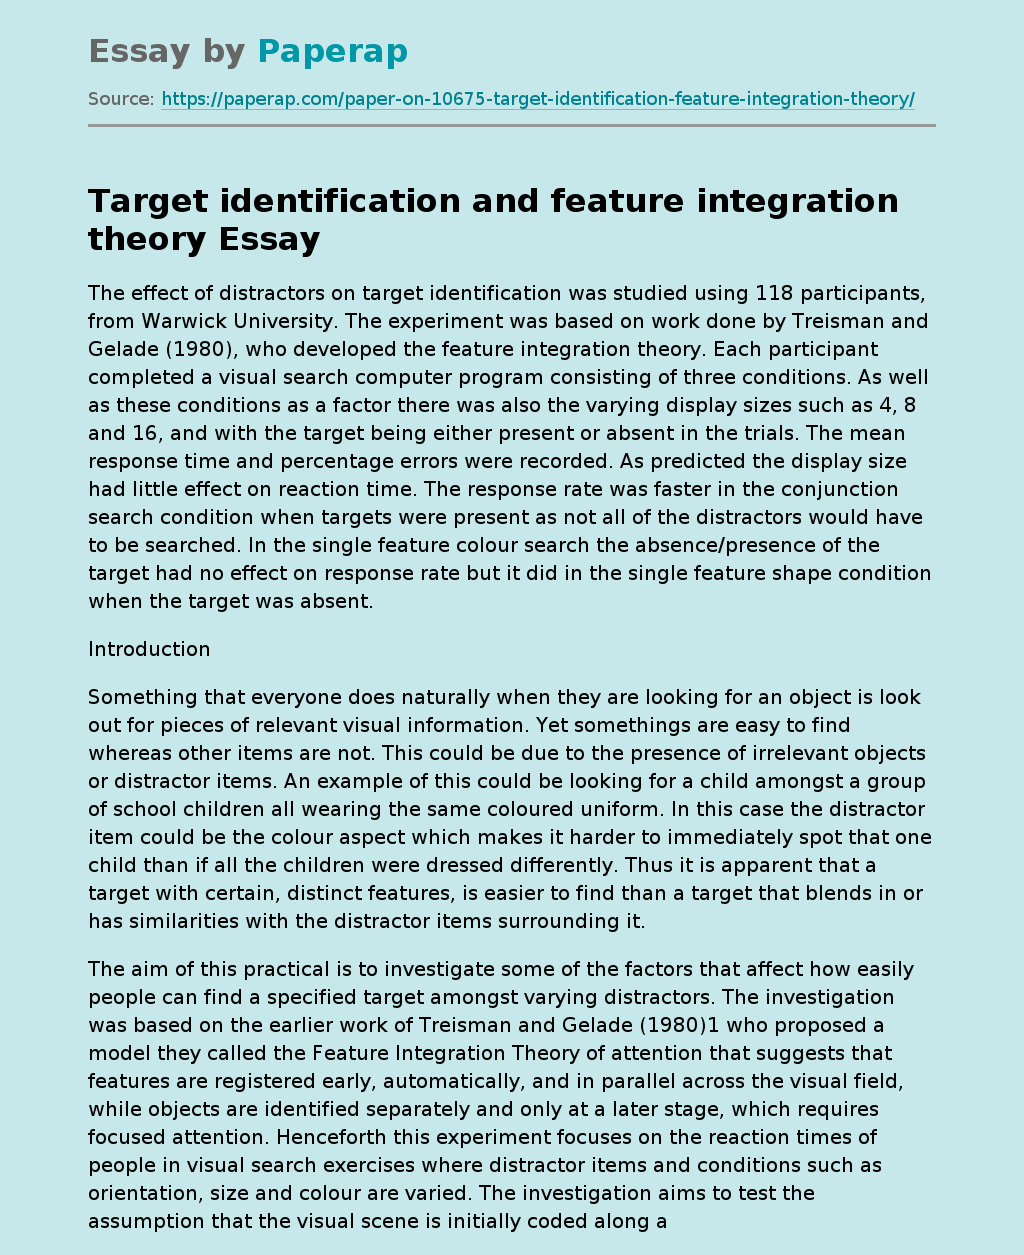 Target identification and feature integration theory